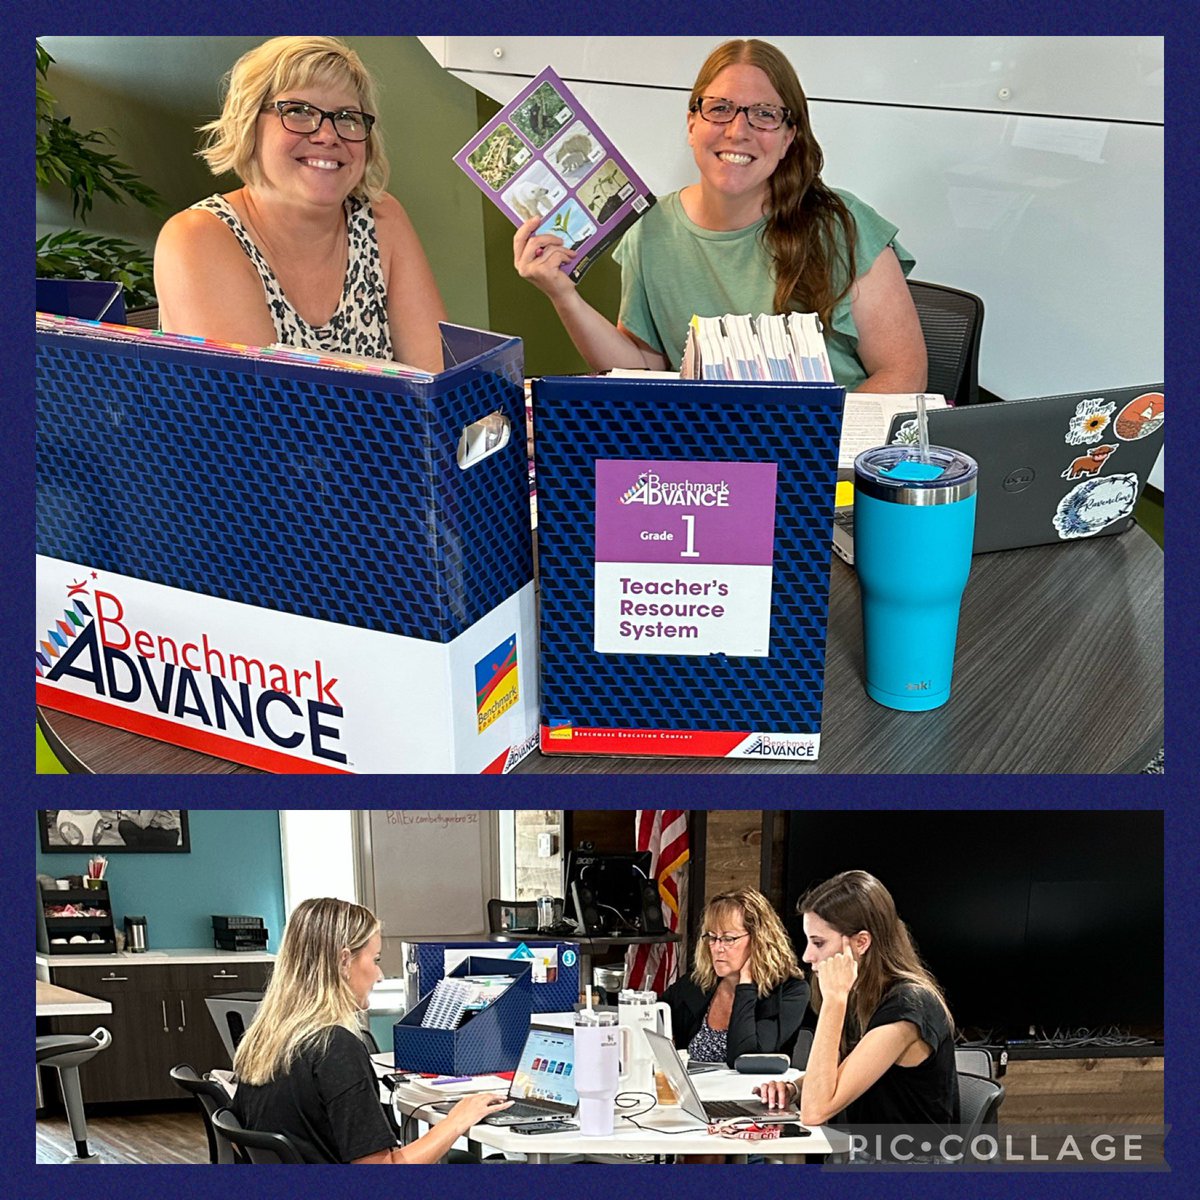 Can I just say I love the dedication of our @Yorkville115 teachers?! Early adopters voluntarily stopping in today to prepare for another year of exemplary instruction! @115ccgs @115GRES @agutzwiler